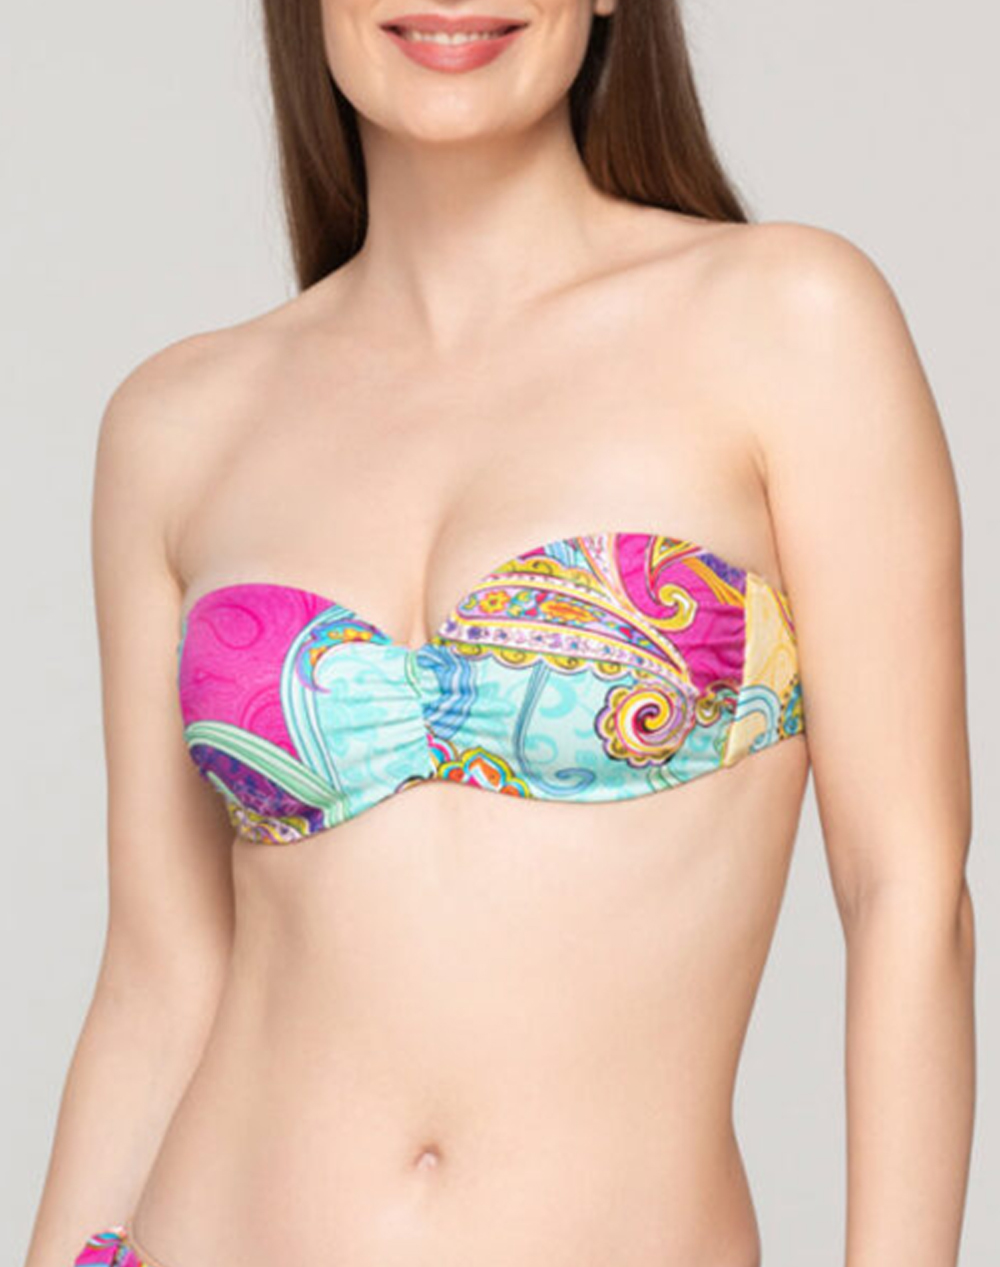 LUNA Madison strapless with molded cup 94280-45 Multi 3810PLUNA1640010_XR26427